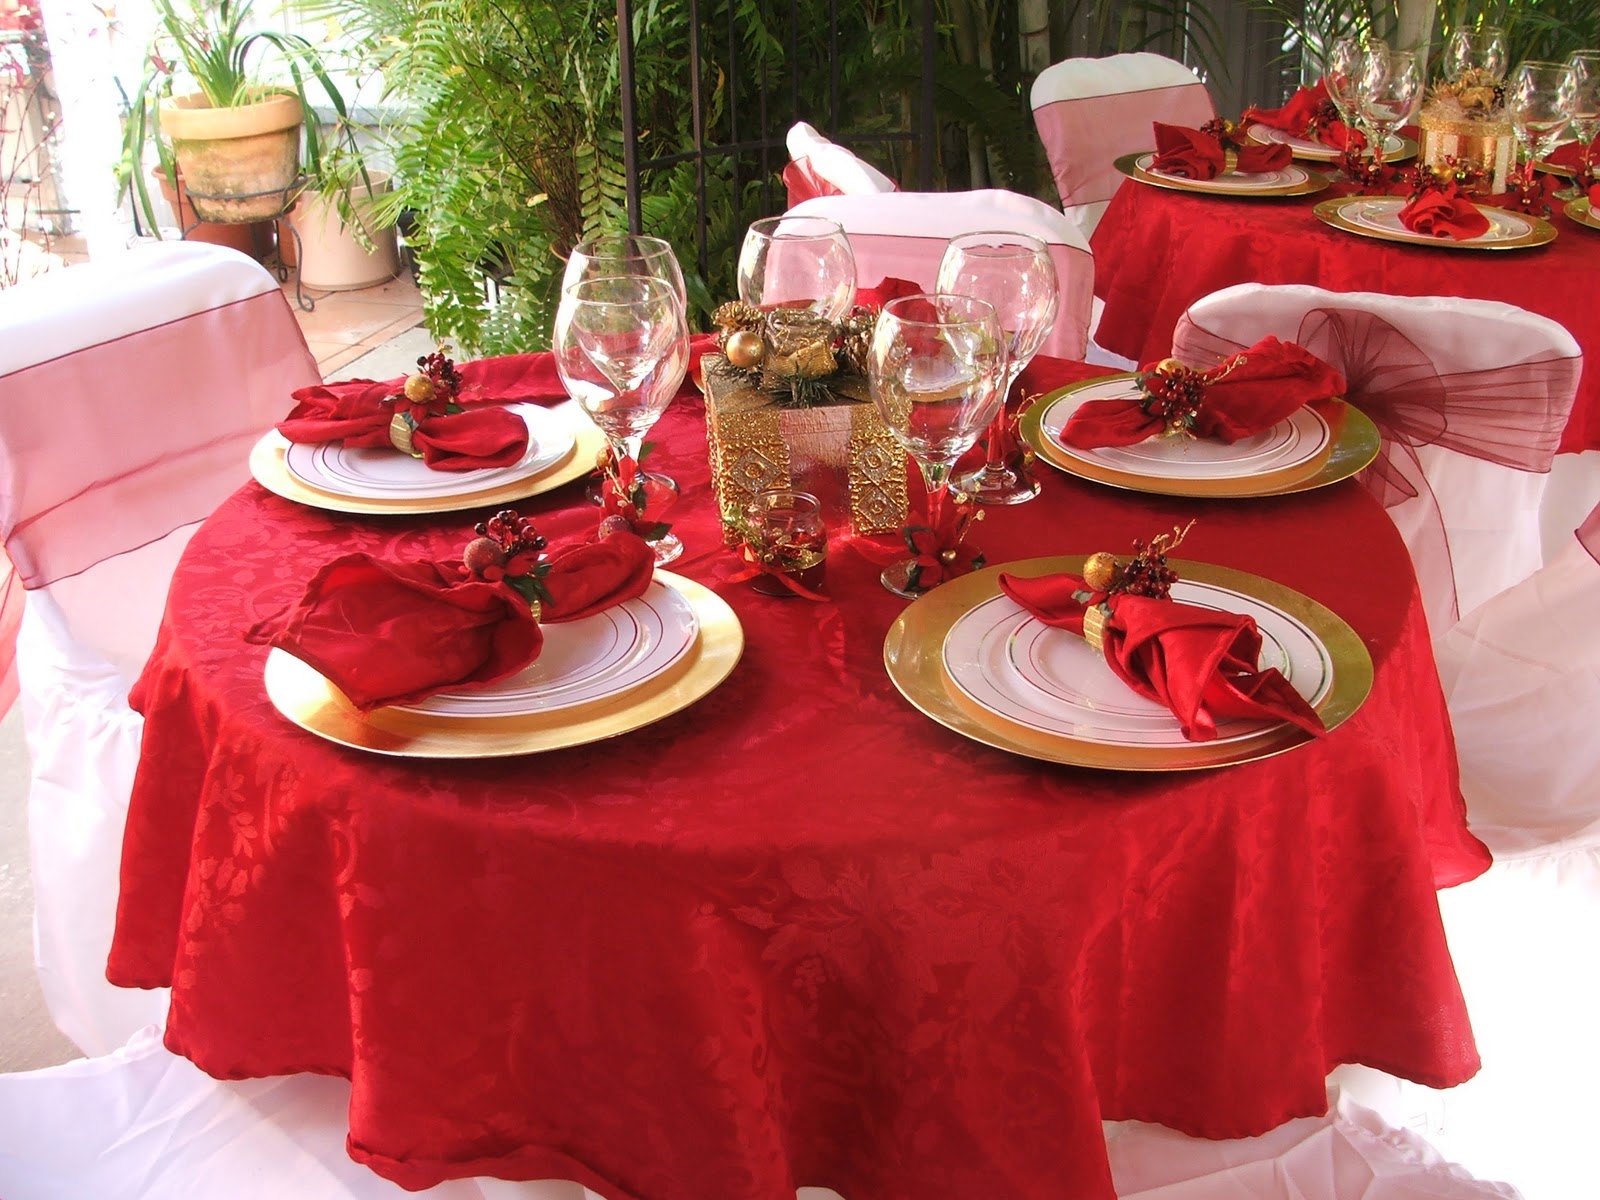 decorations-sophisticated-christmas-party-table-decoration-with-awesome-red-tablecloth-and-cute-gold-tissue-box-table-decoration-ideas-for-christmas